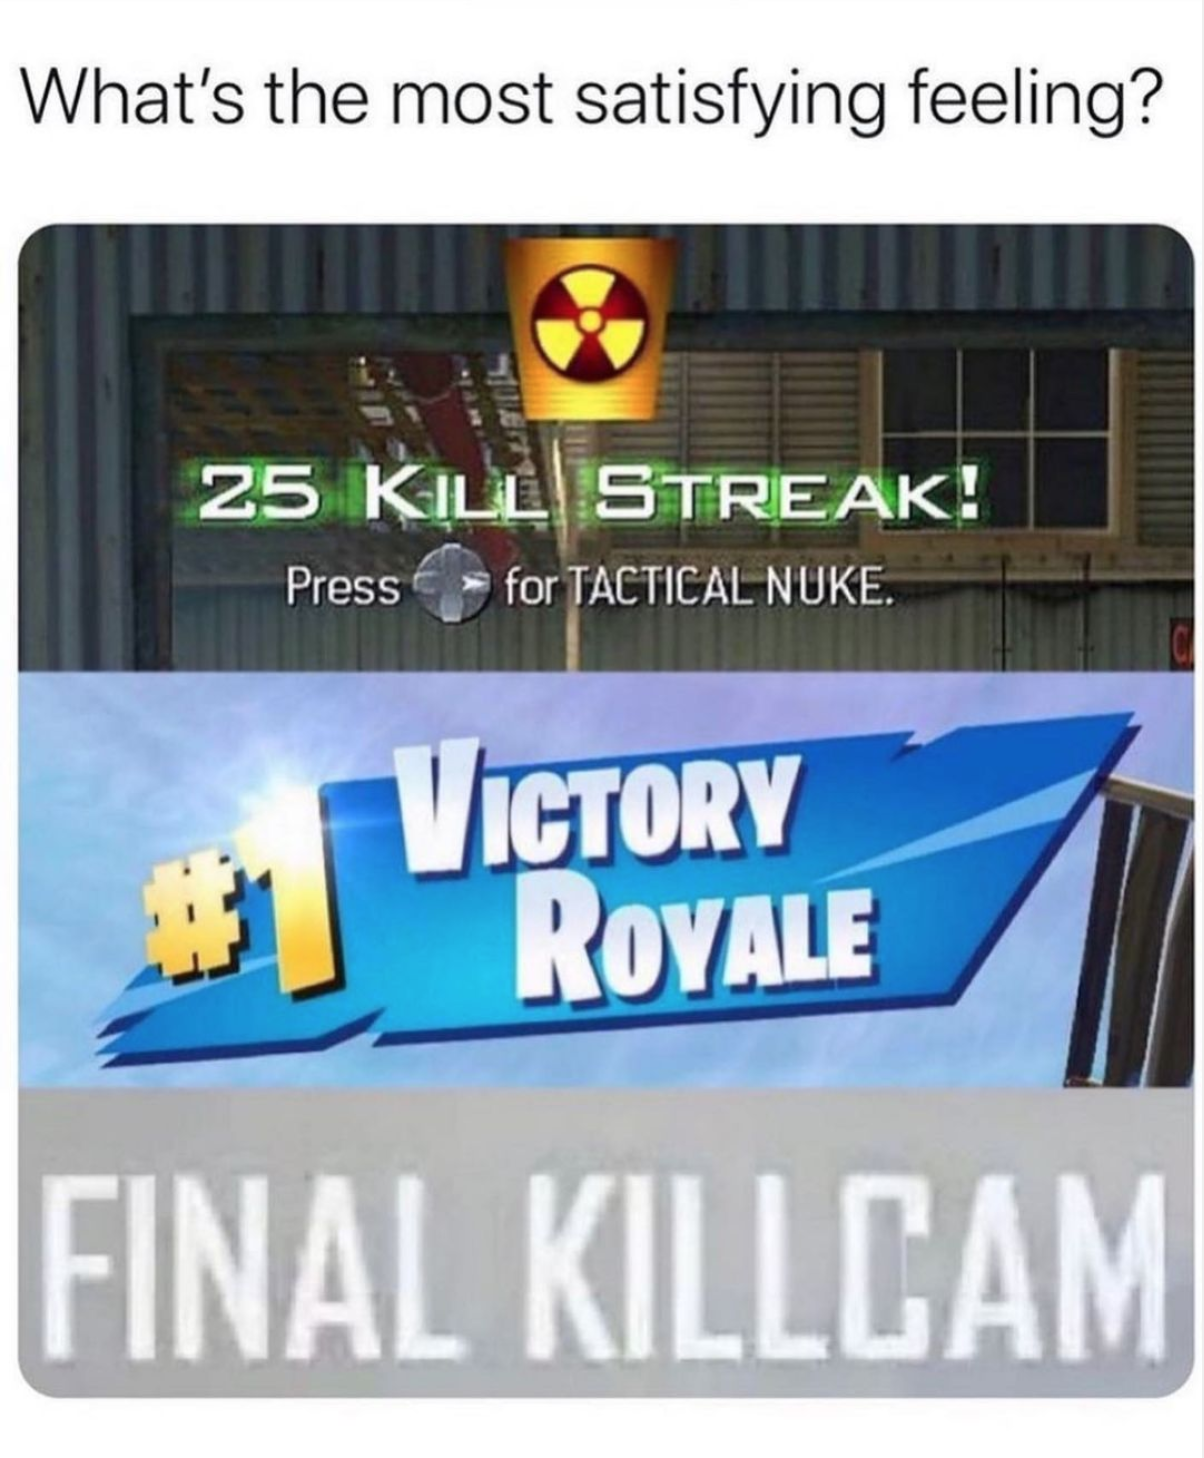 funny gaming memes - What's the most satisfying feeling? 25 Kill Streak! Press for Tactical Nuke. Victory Royale Final Killcam